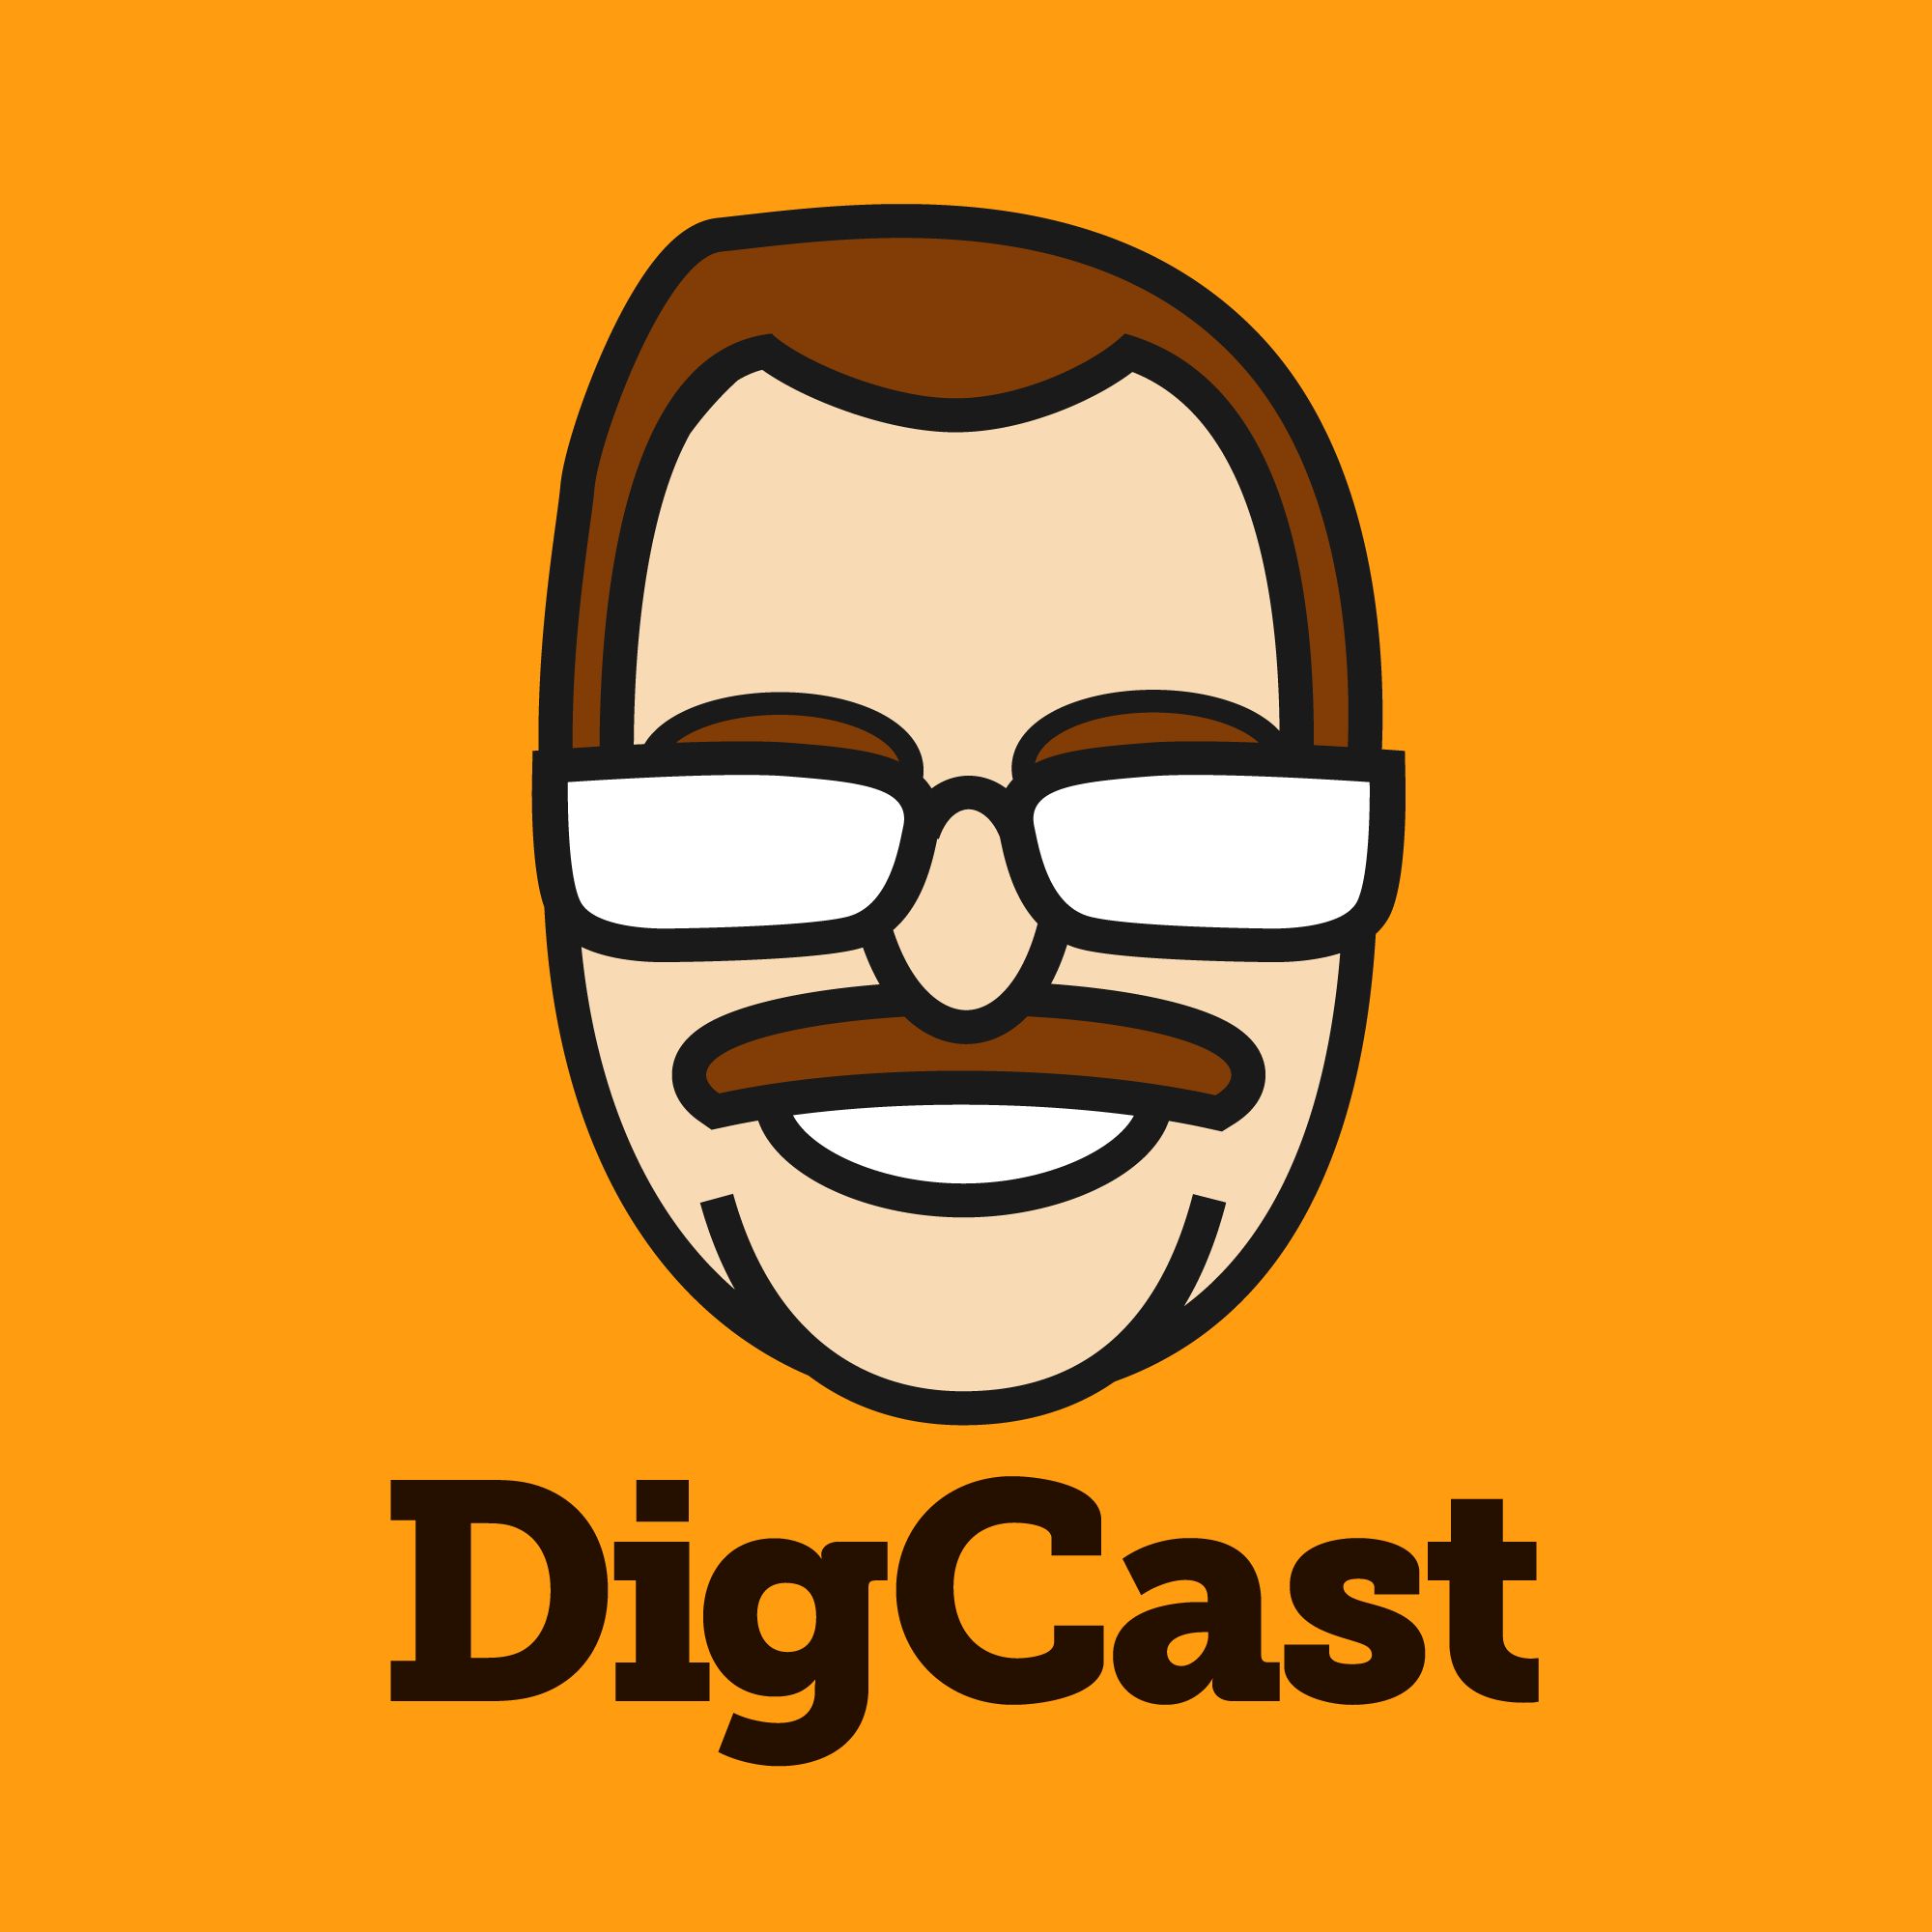 The DigCast with Carl Diggler